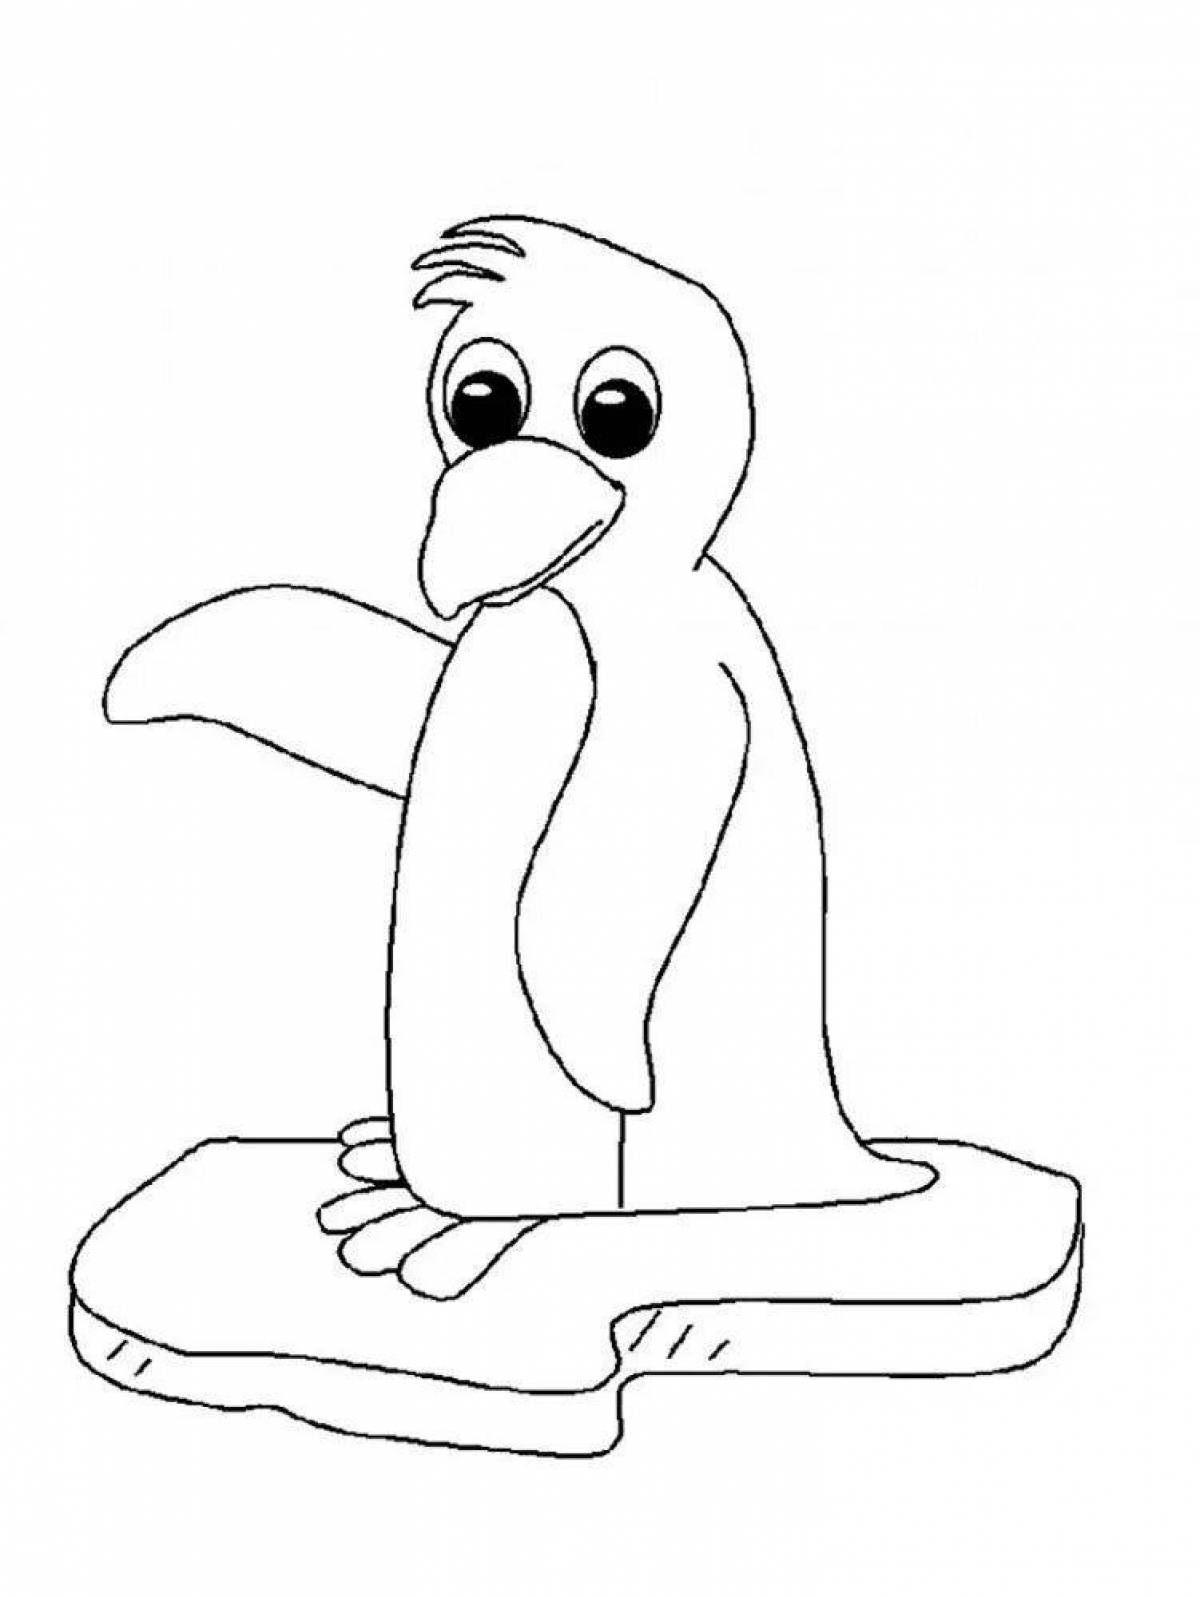 Colorful penguin coloring pages for kids